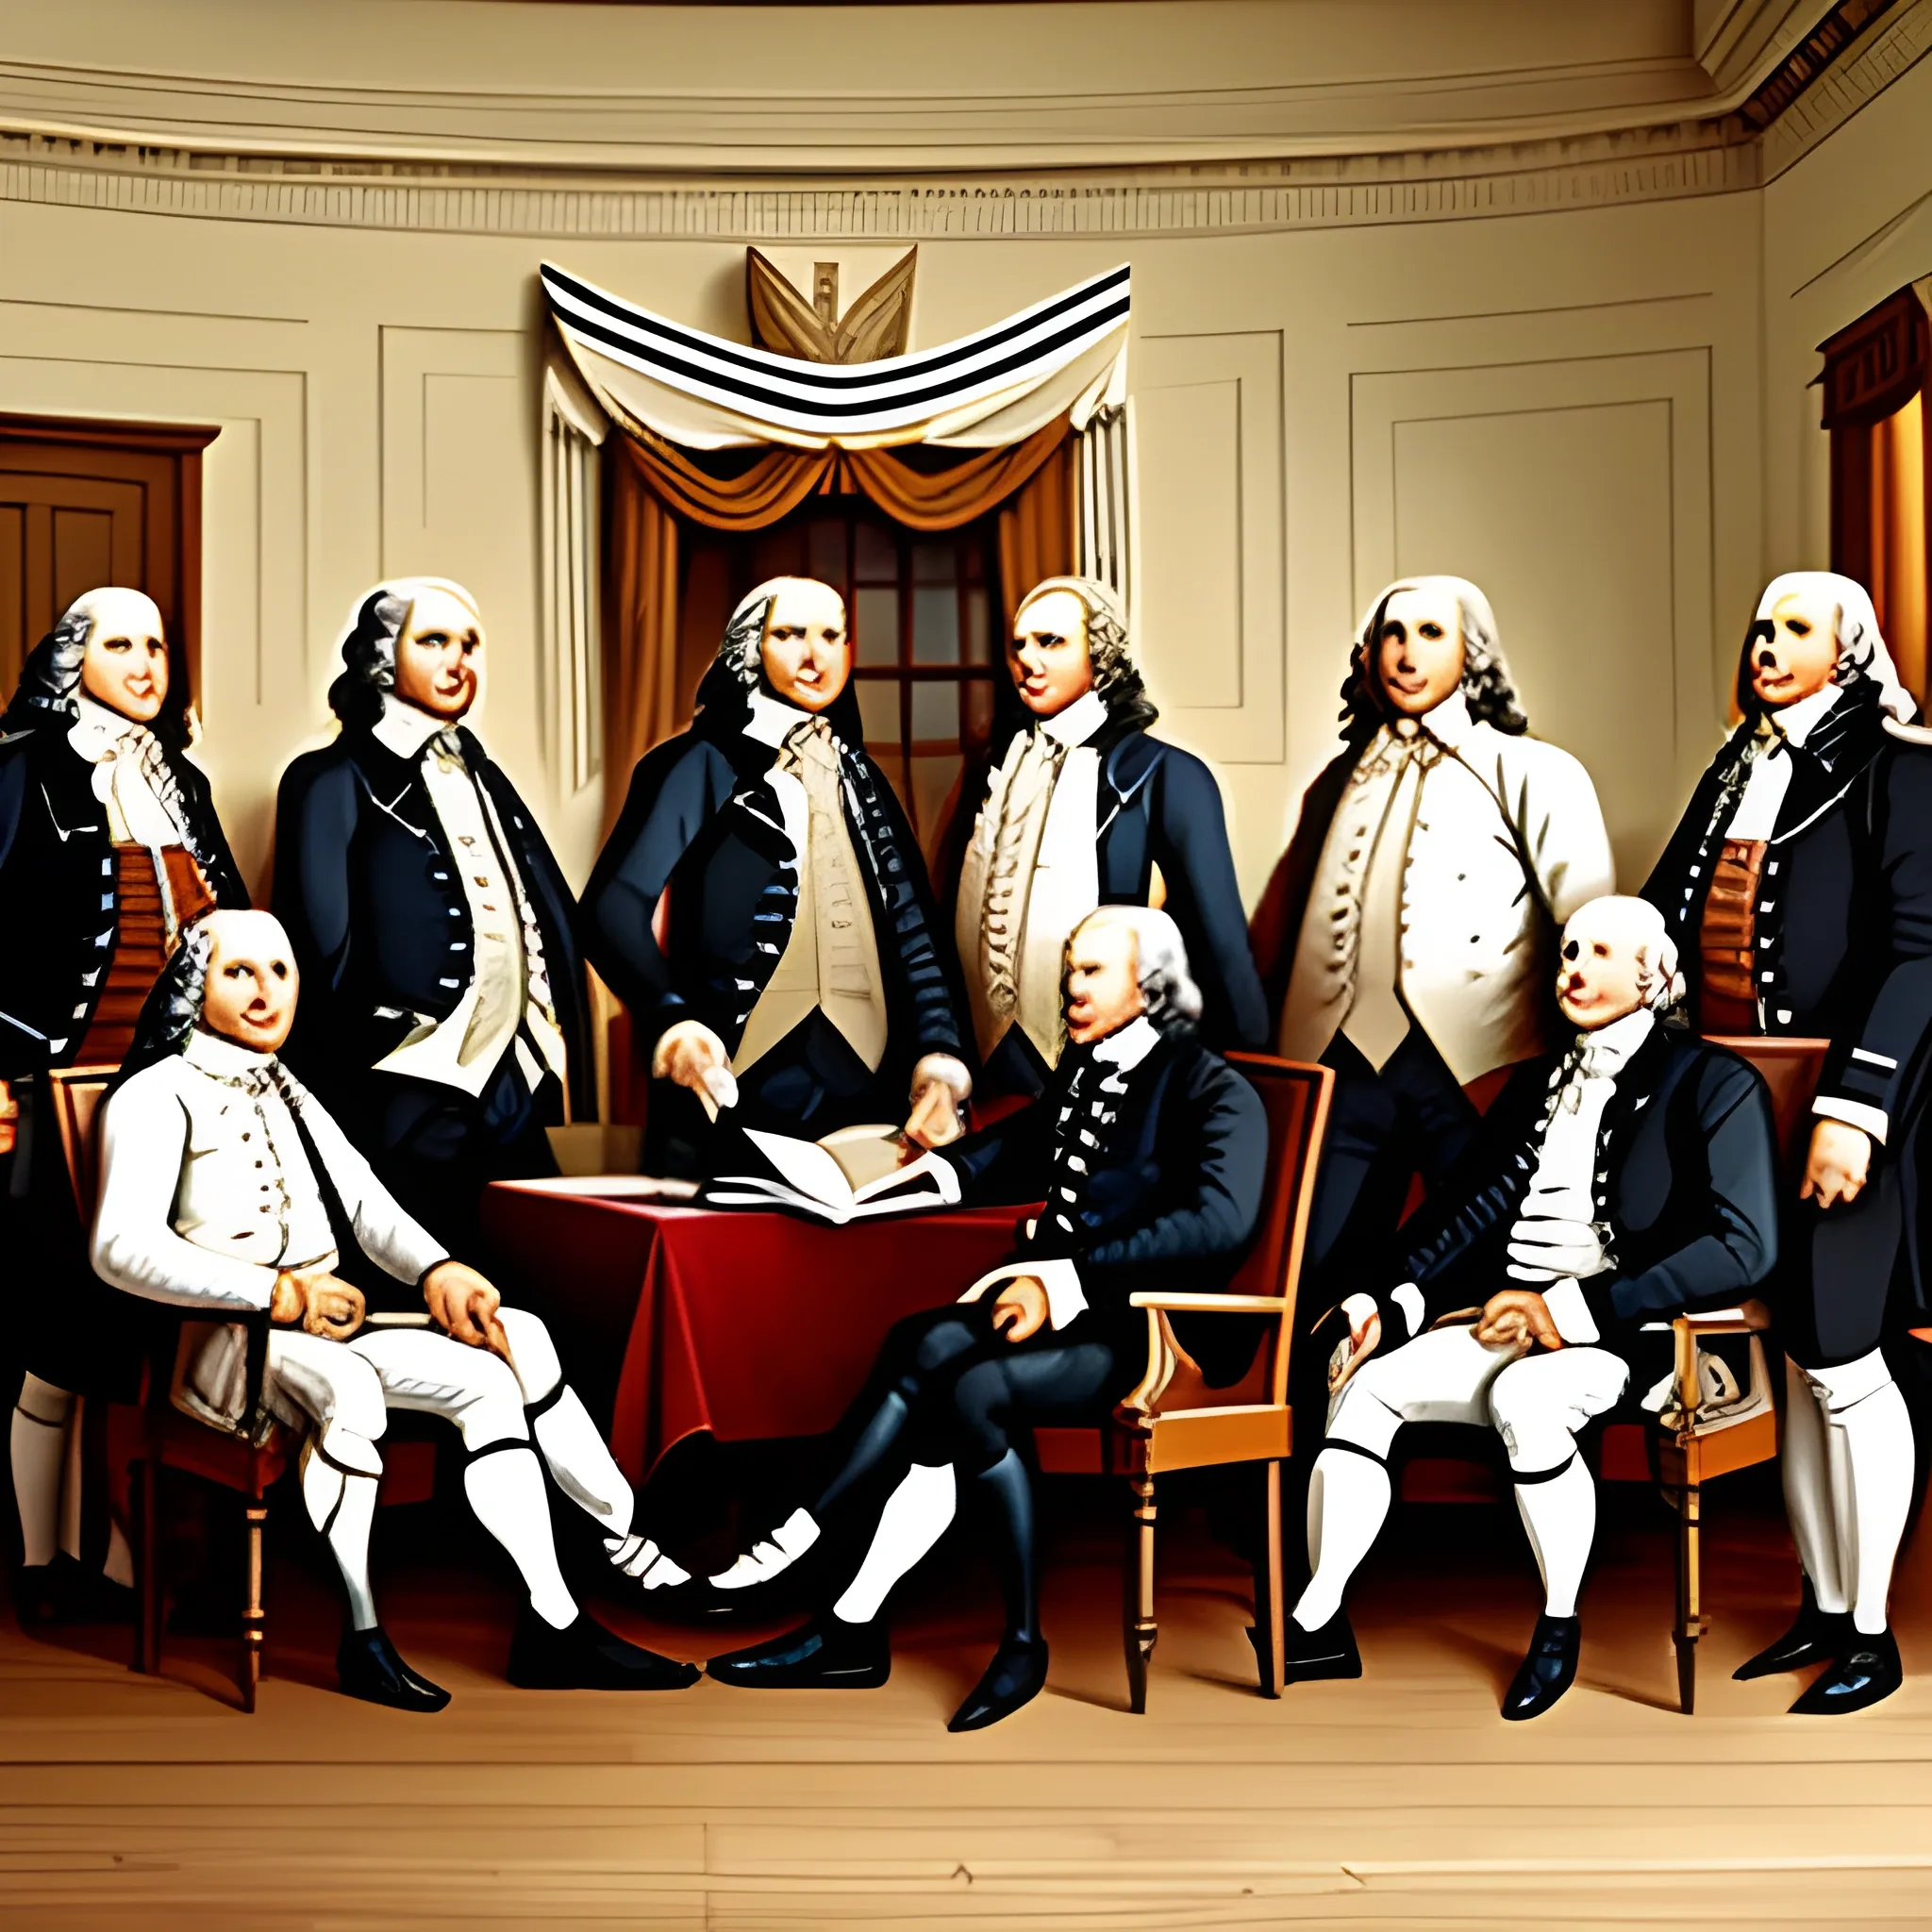 America's founding fathers